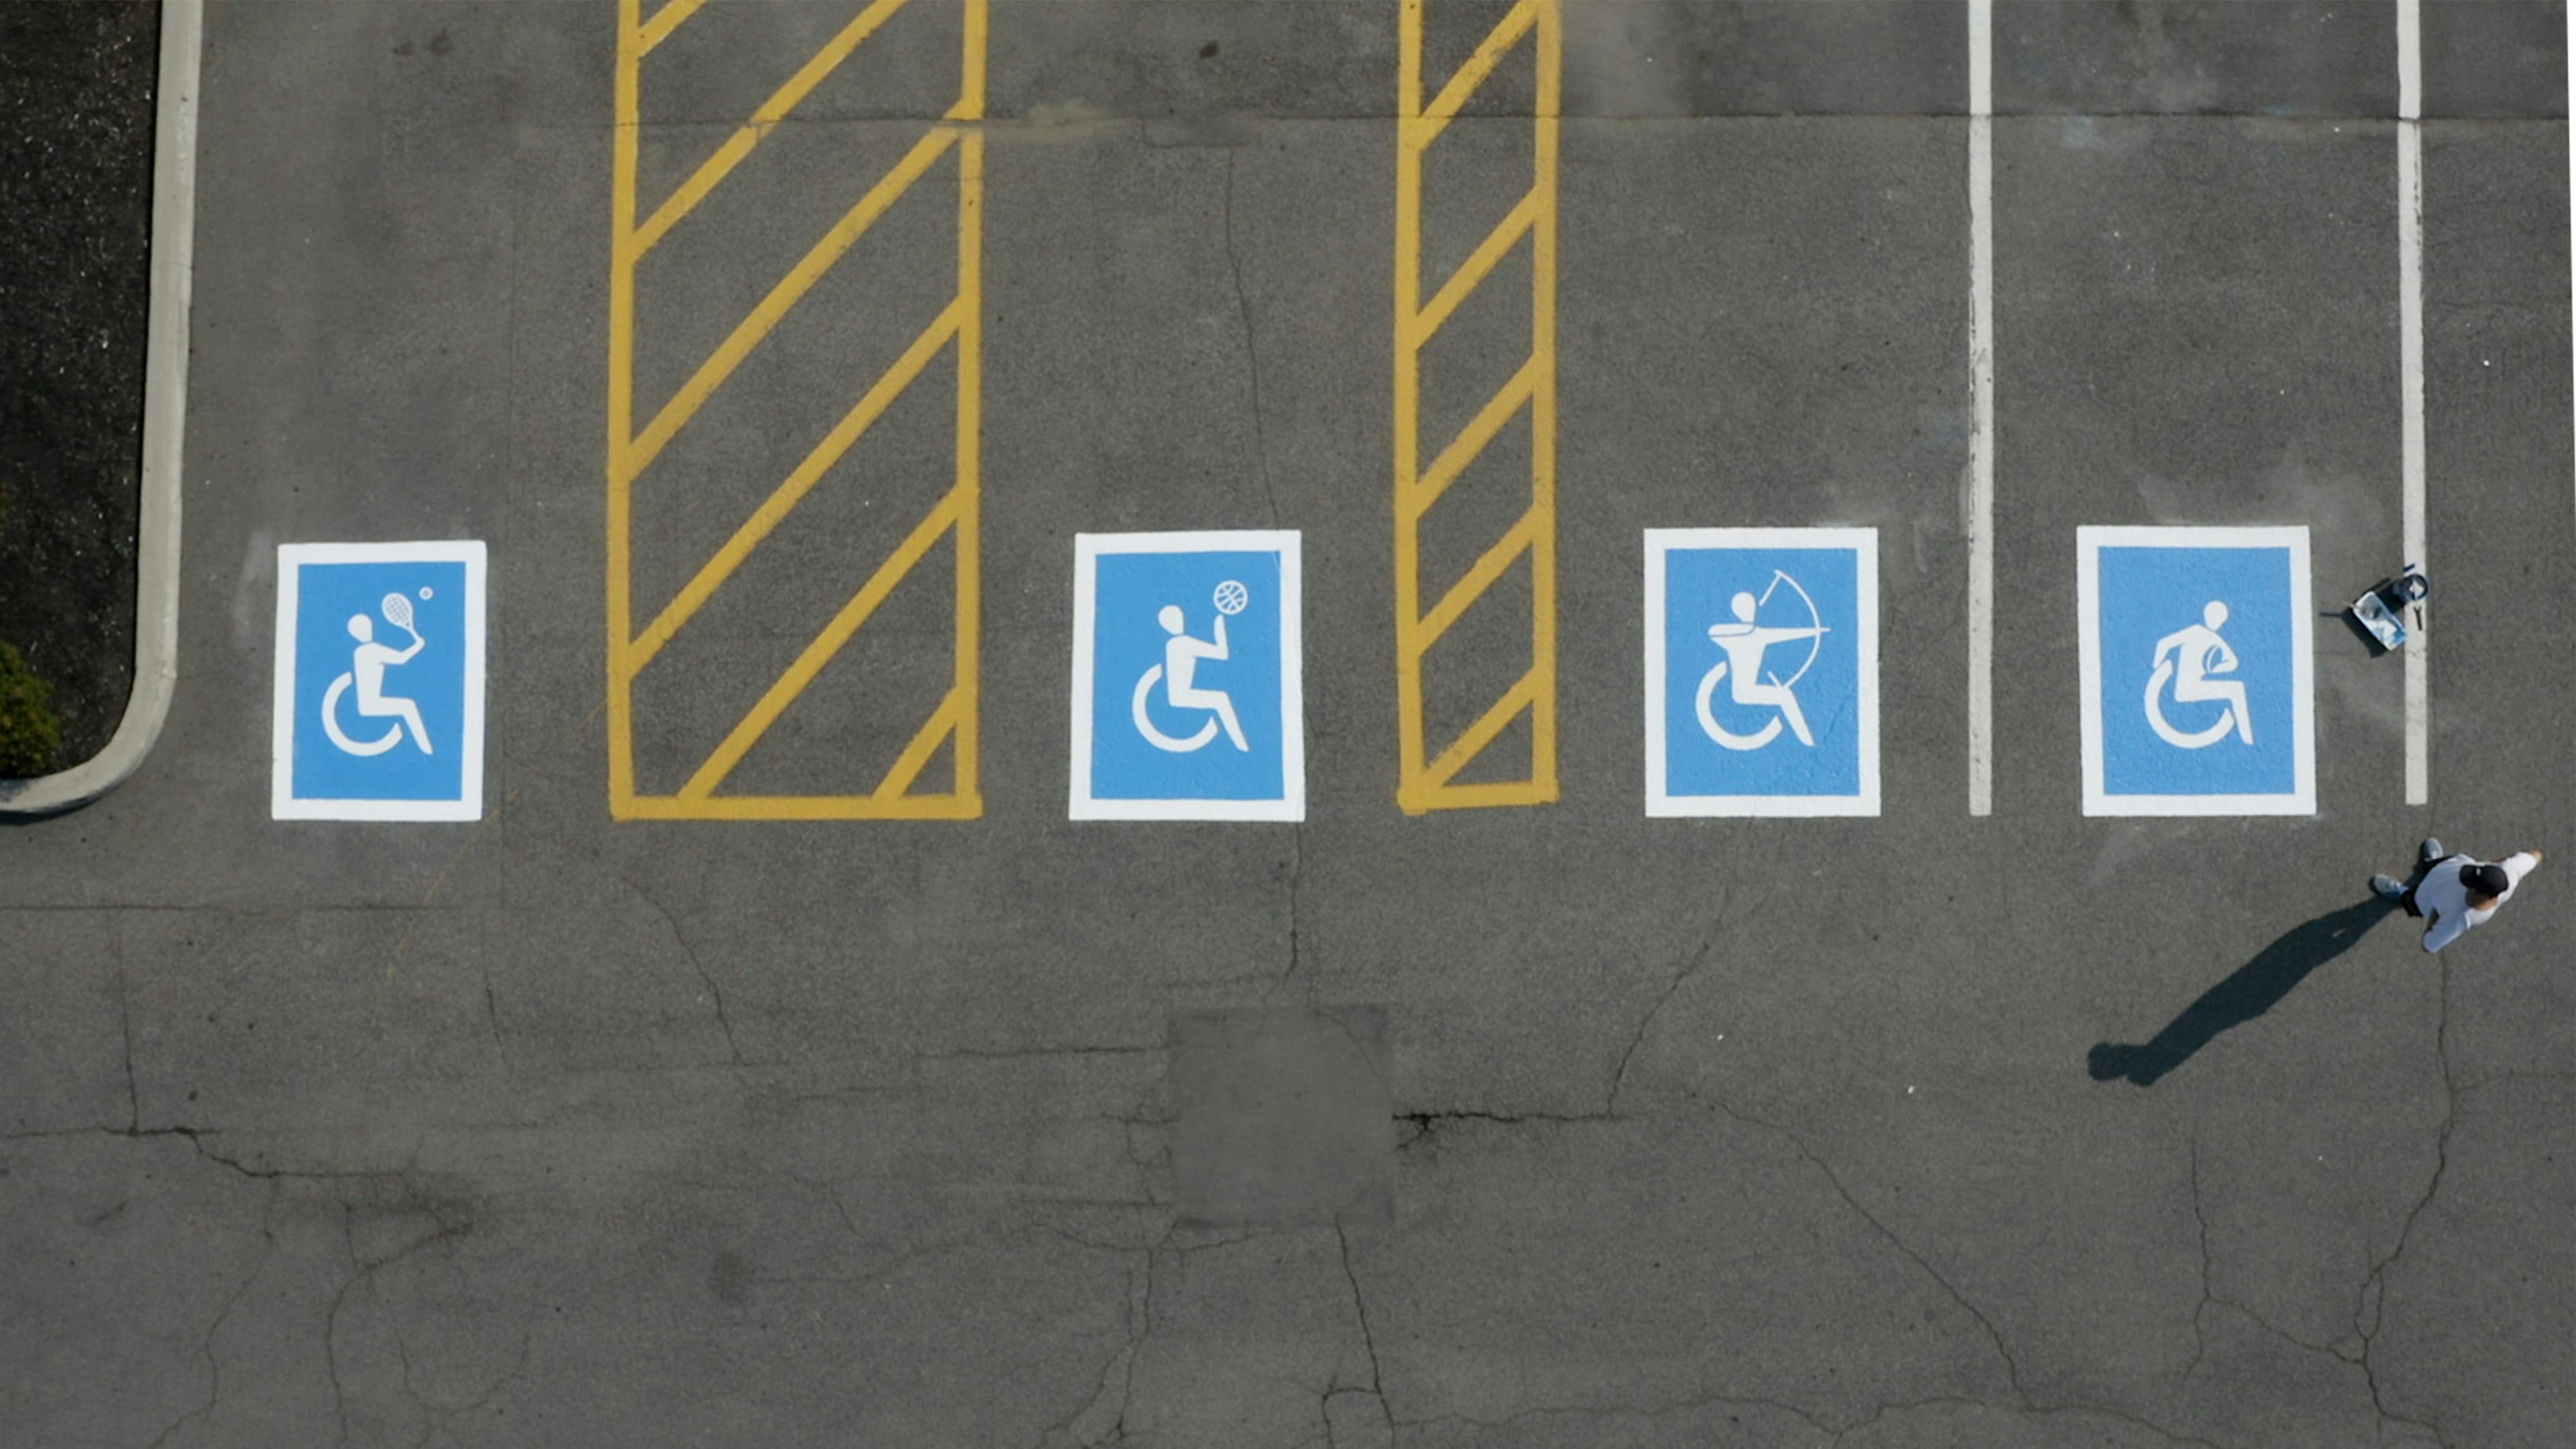 Ability signs painted on parking spaces.